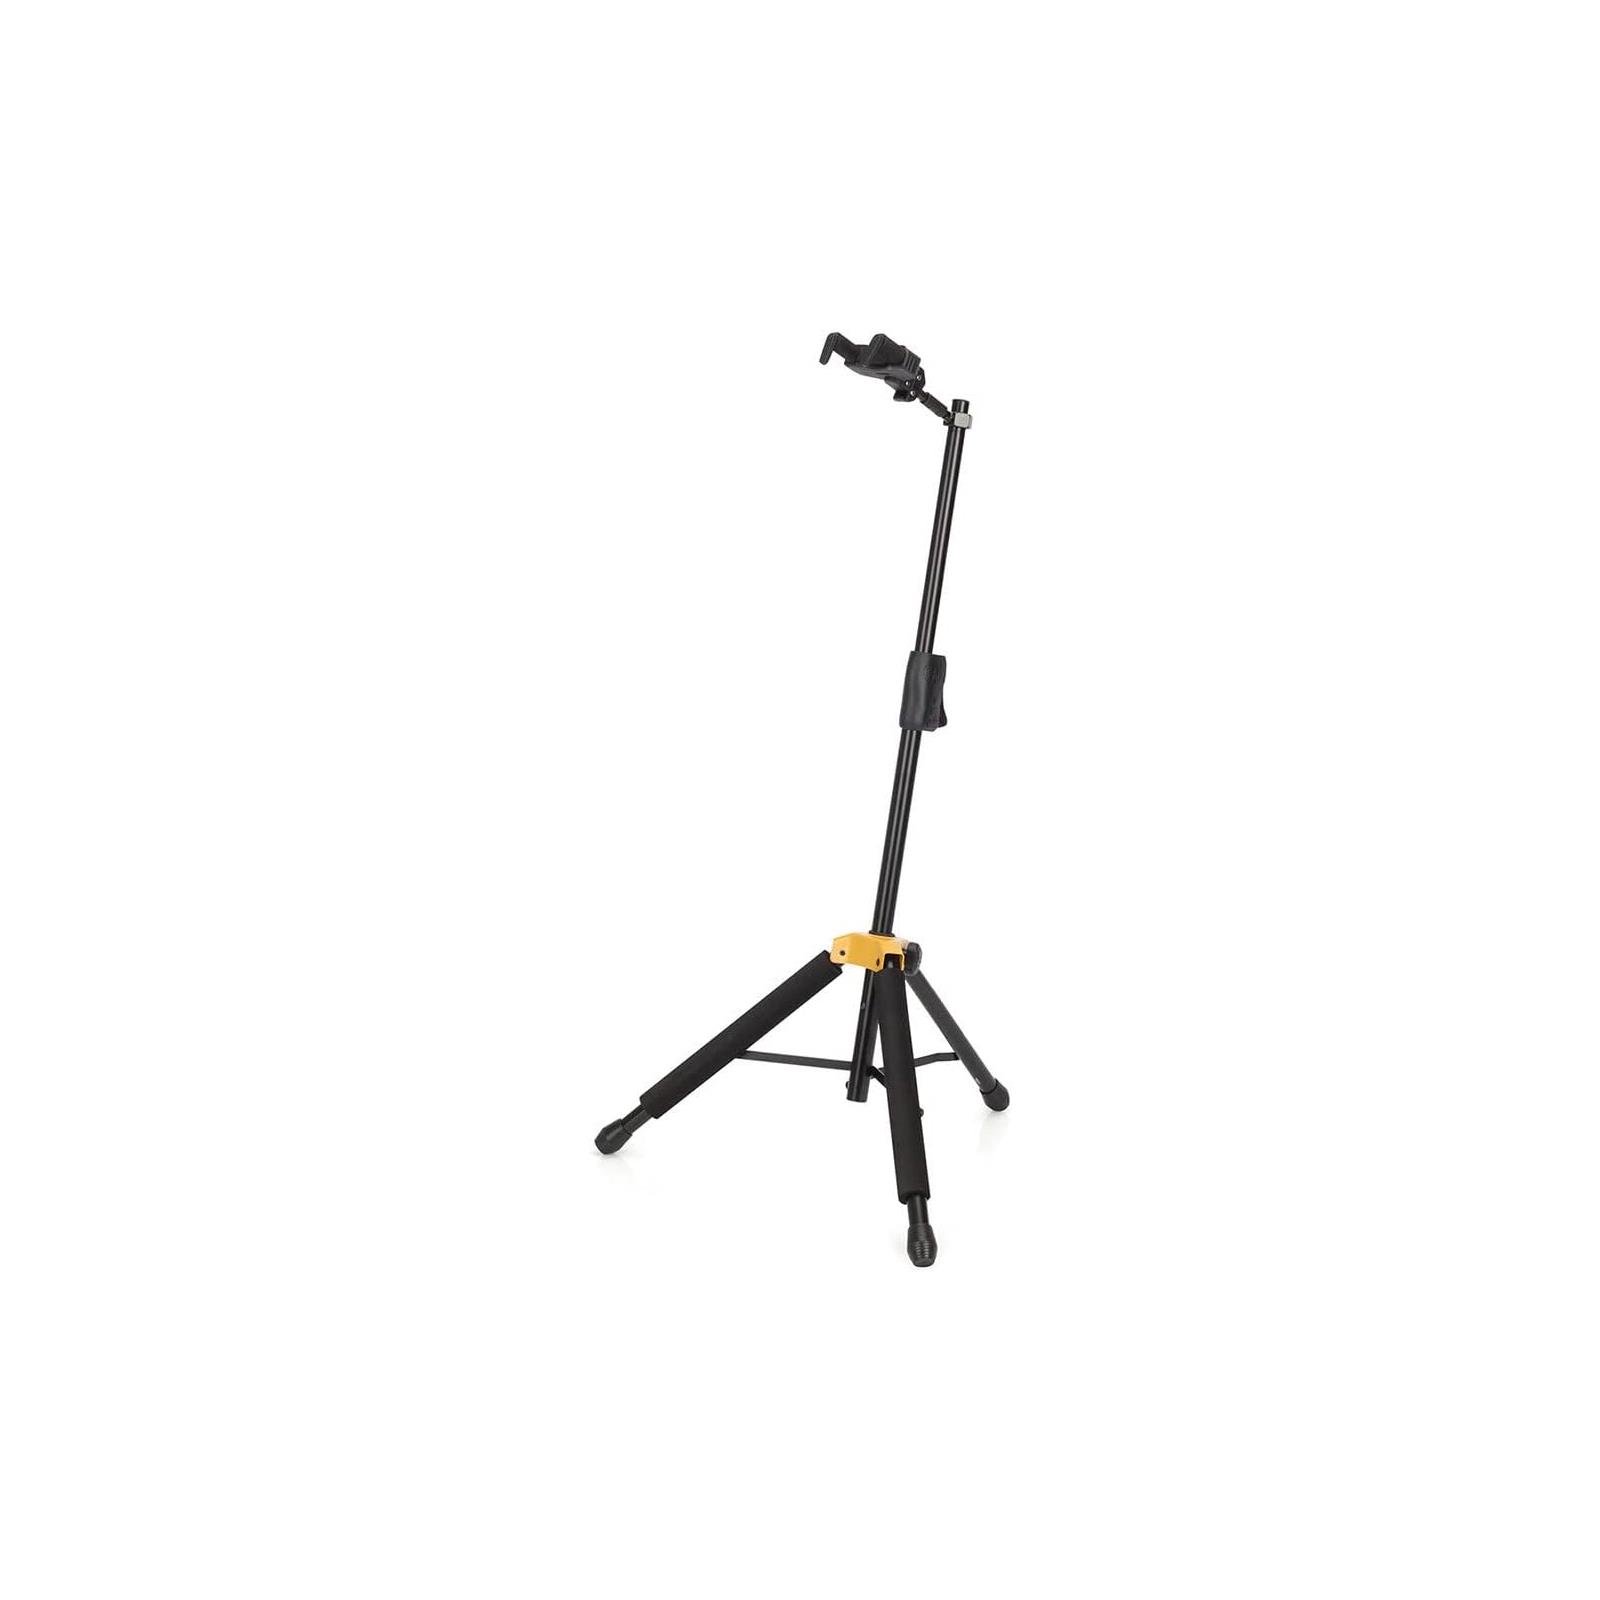 Hercules PLUS Series Universal AutoGrip Guitar Stand with Foldable Yoke